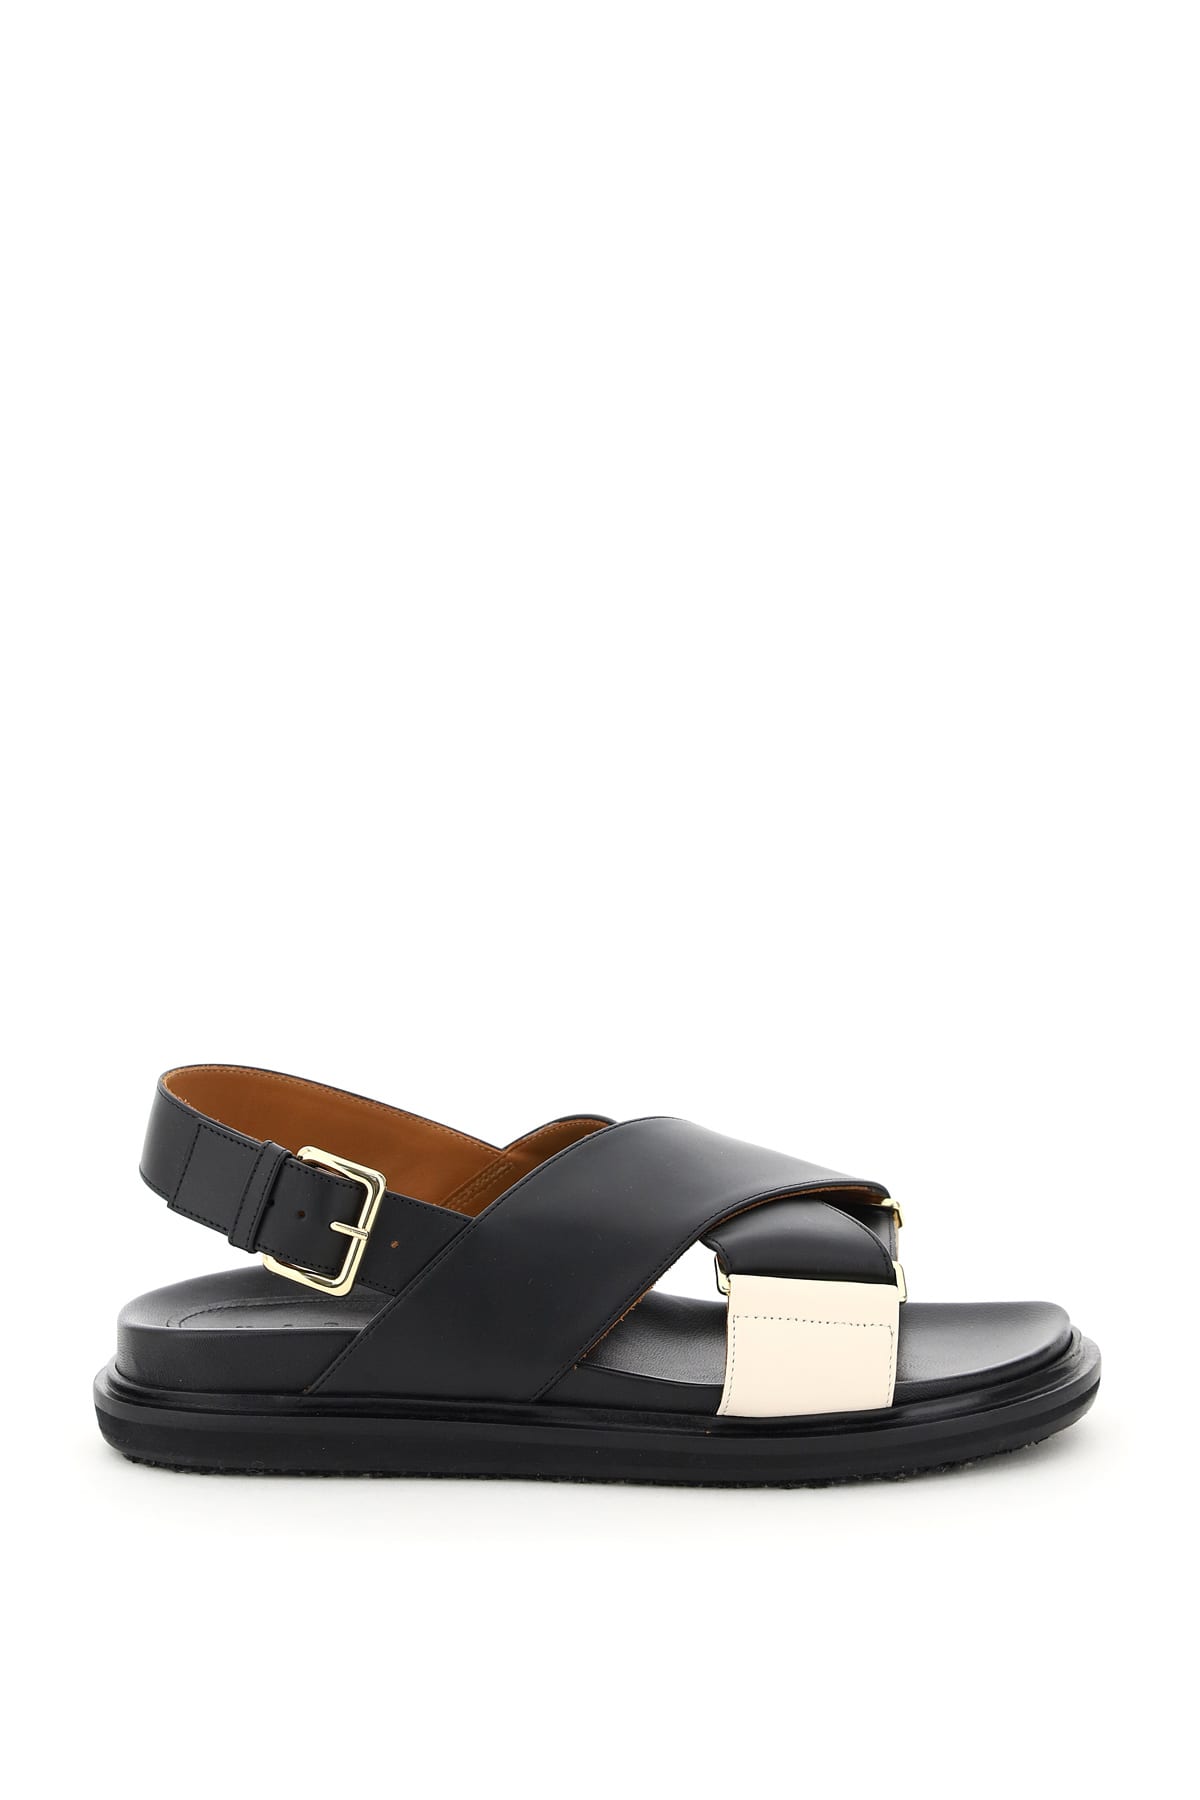 Buy Marni Fussbett Leather Sandals online, shop Marni shoes with free shipping